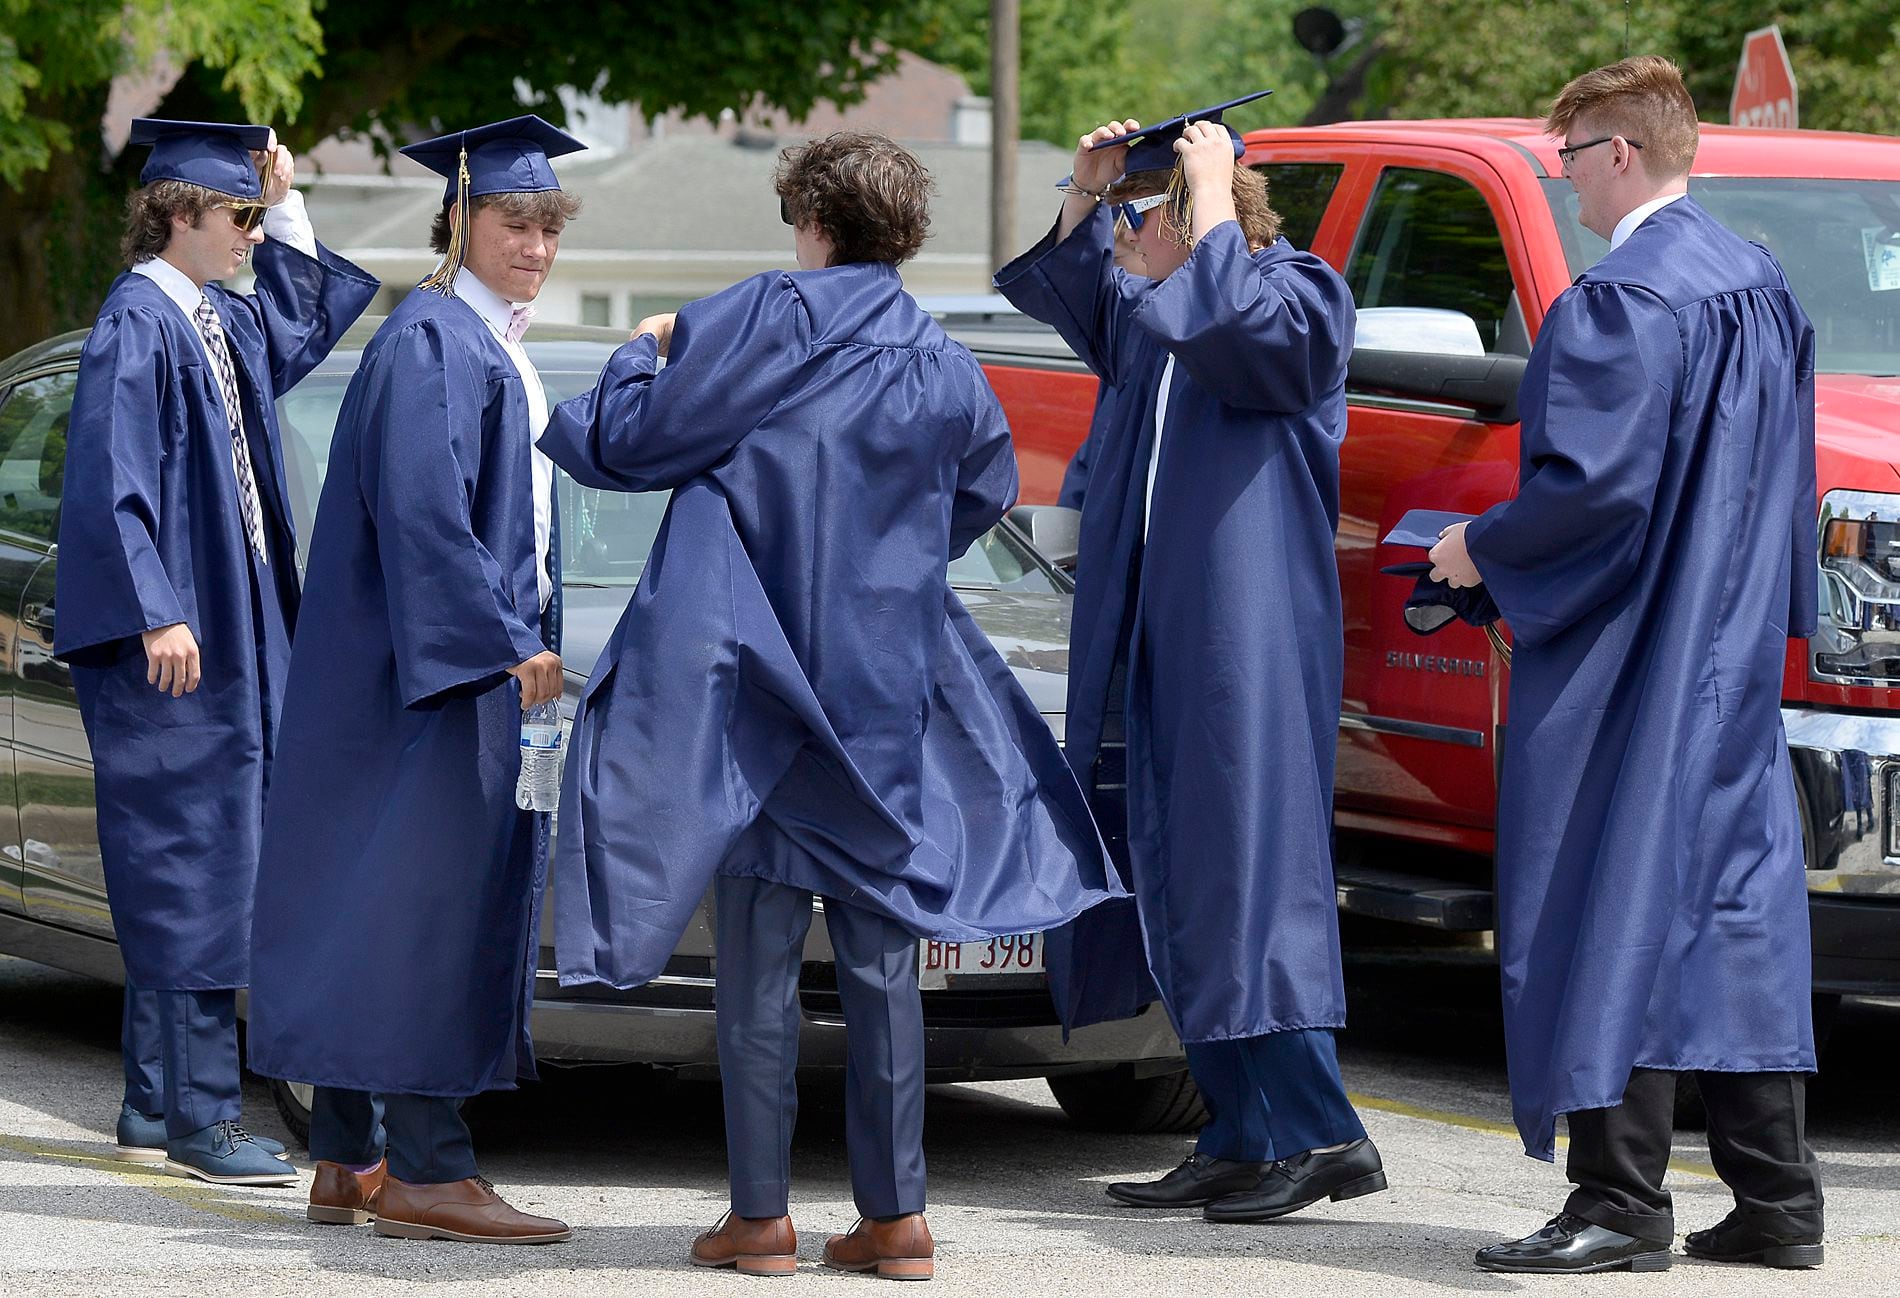 No dressing rooms necessary as Marquette Academy graduates get ready for the ceremony Sunday, May 28, 2023, in the parking lot at the school.